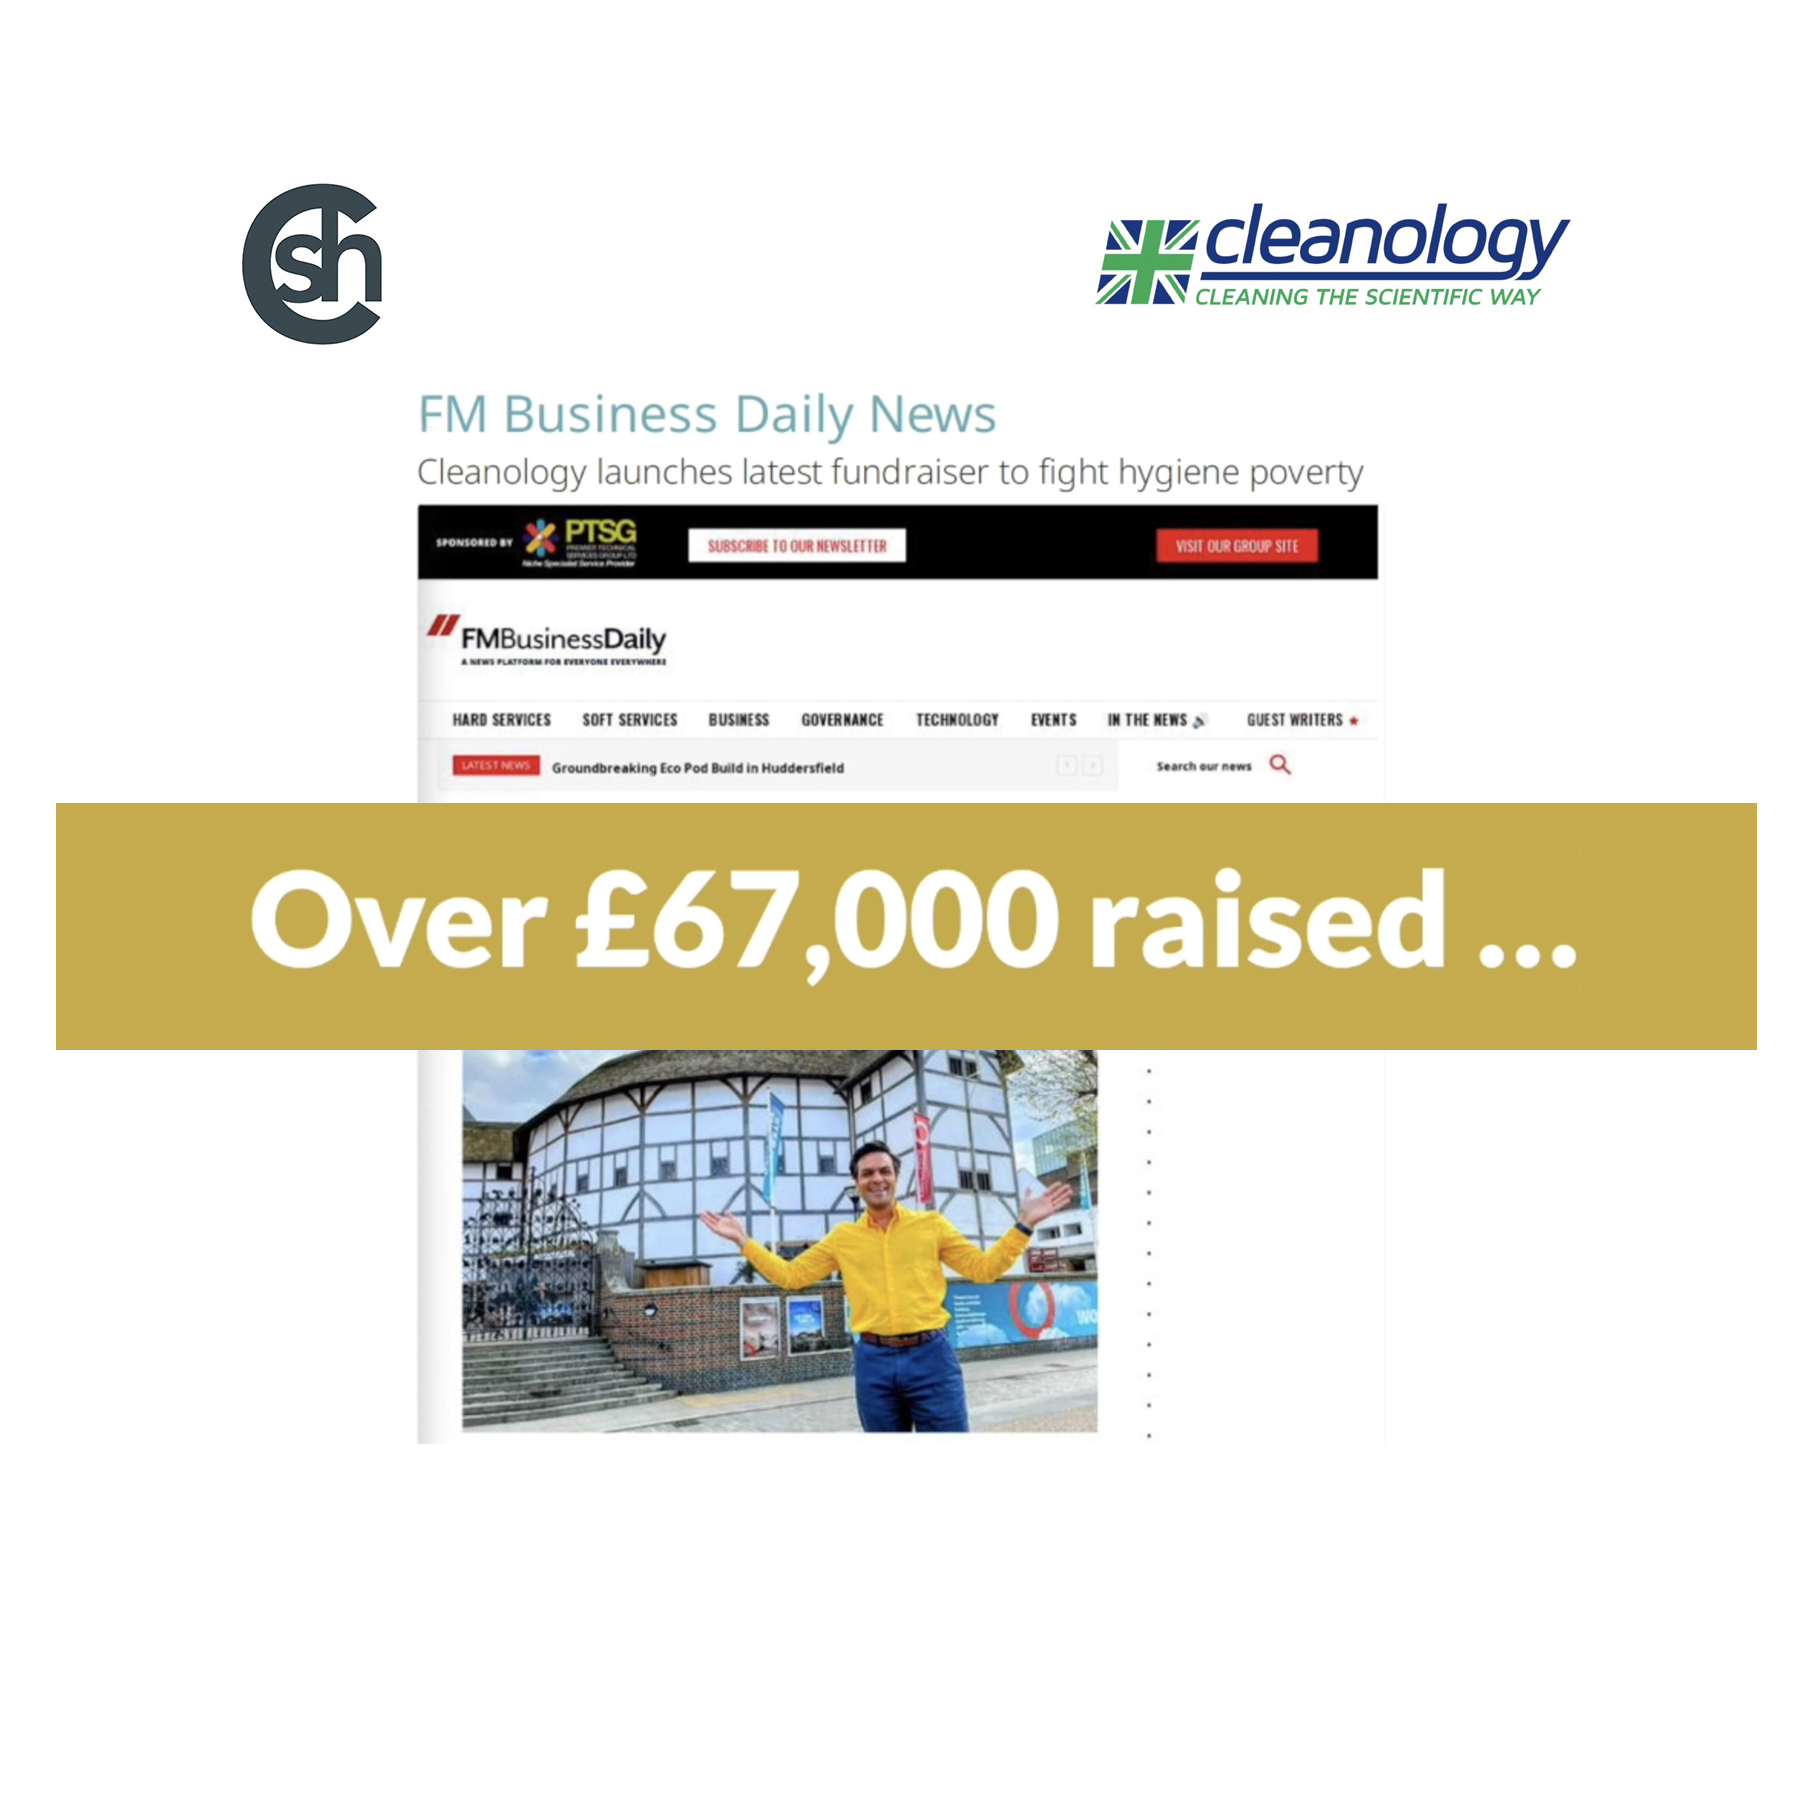 Celebrating Cleanology’s fundraising success for The Hygiene Bank